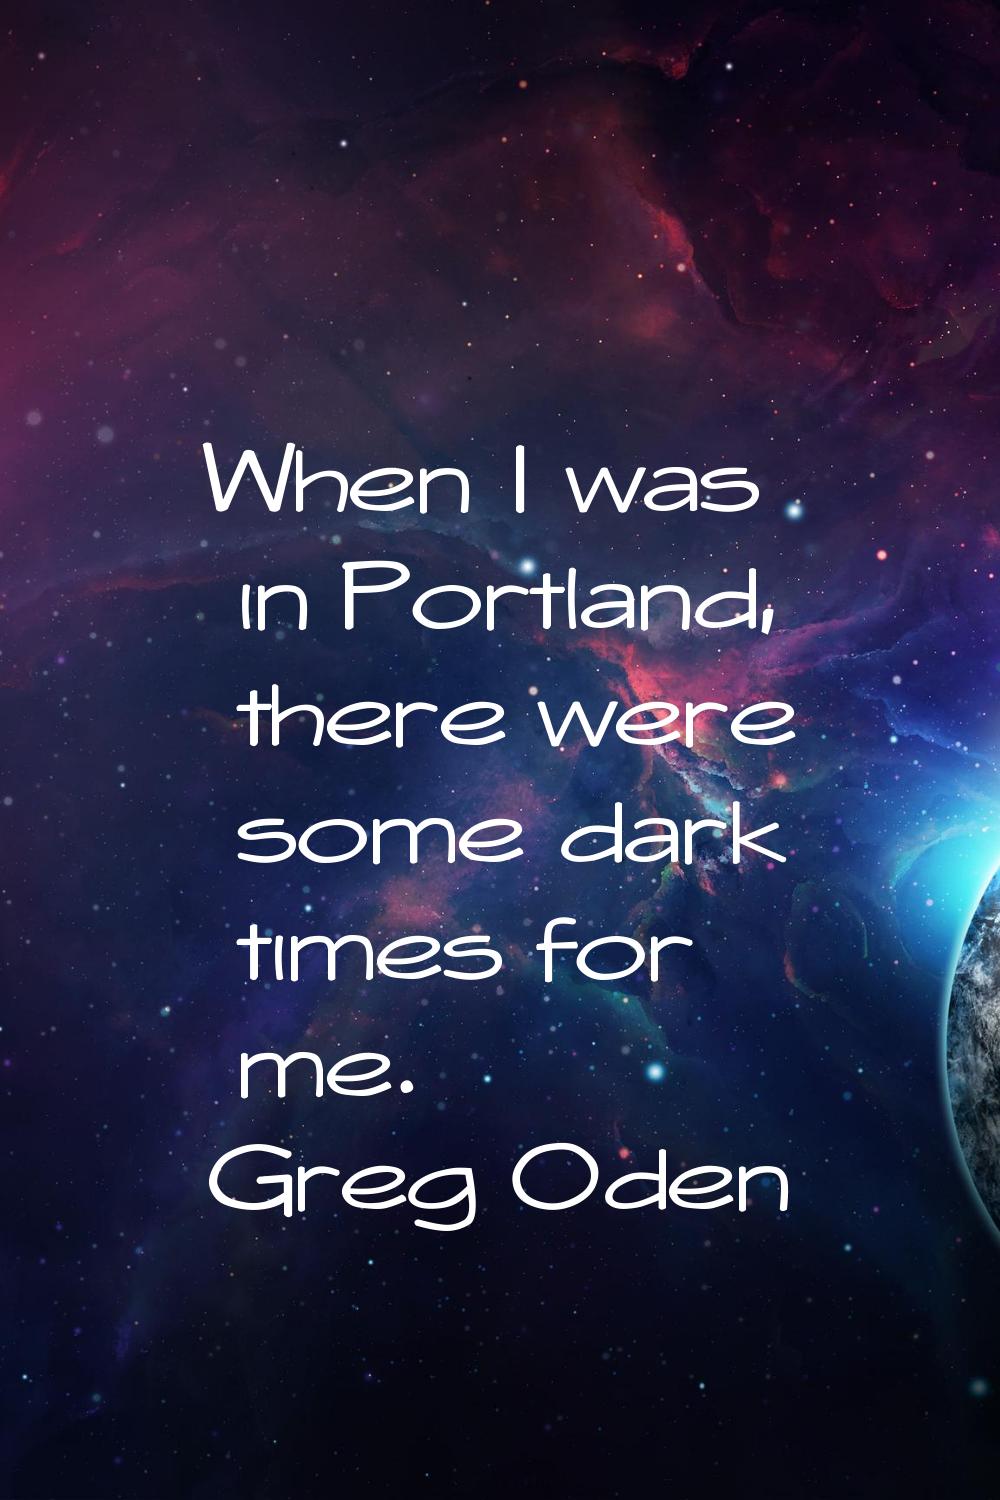 When I was in Portland, there were some dark times for me.